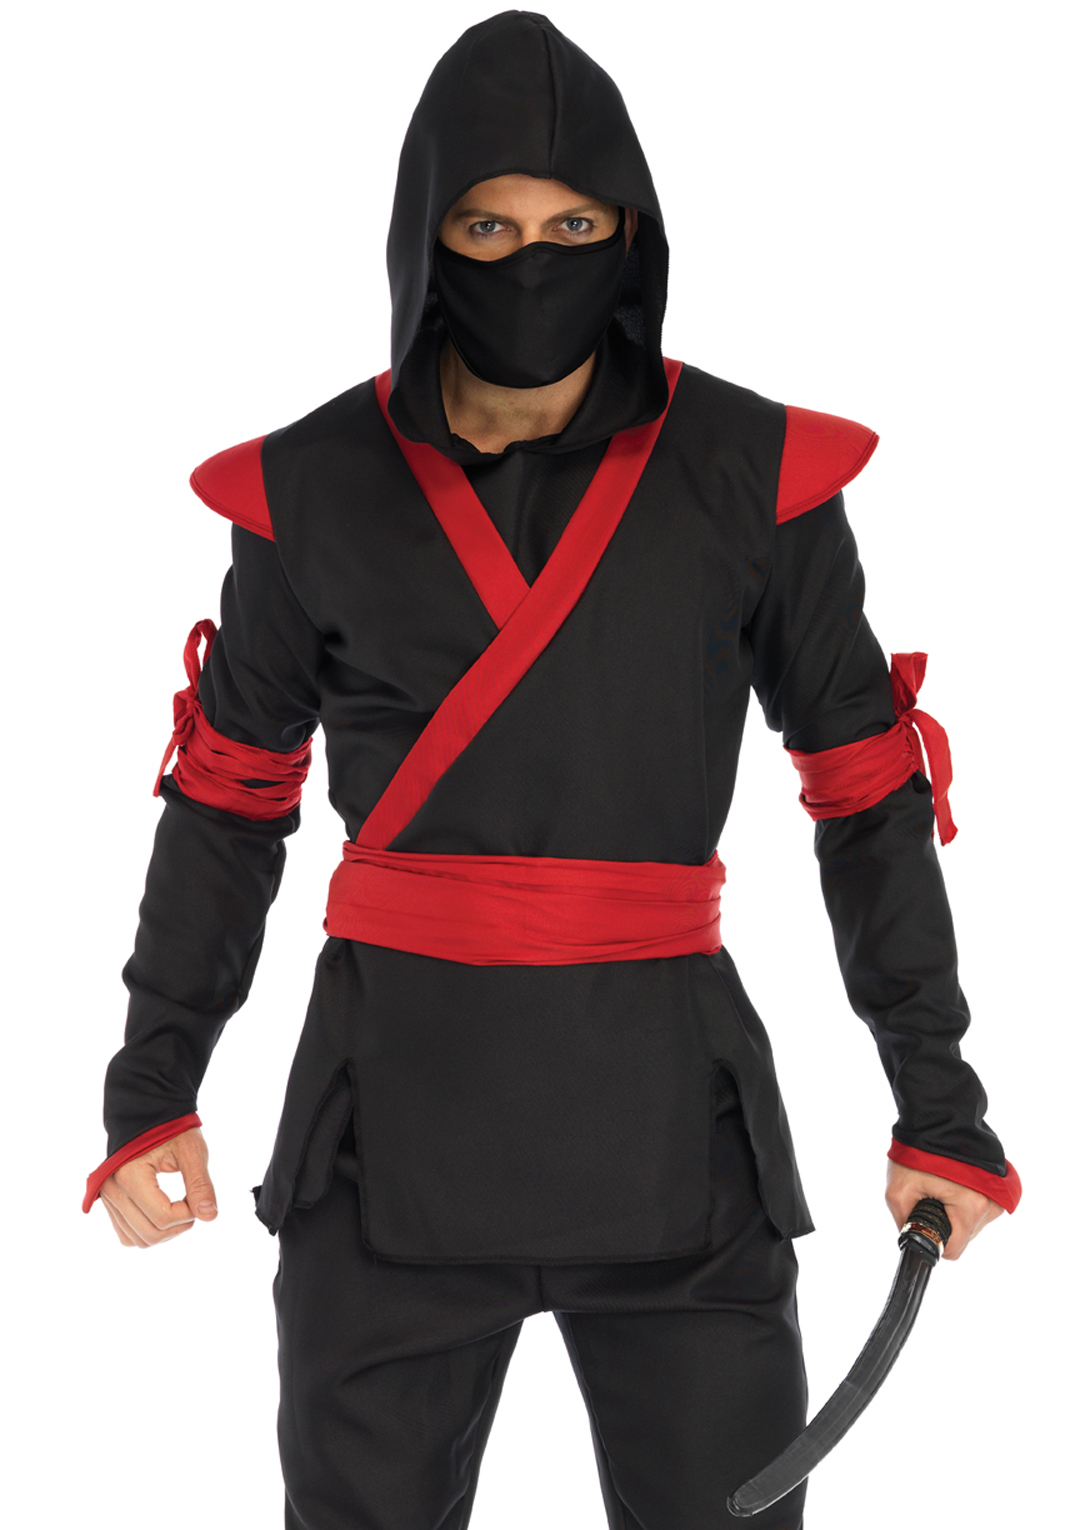 Leg Avenue 5PC Ninja, includes shirt with Black/Red Color